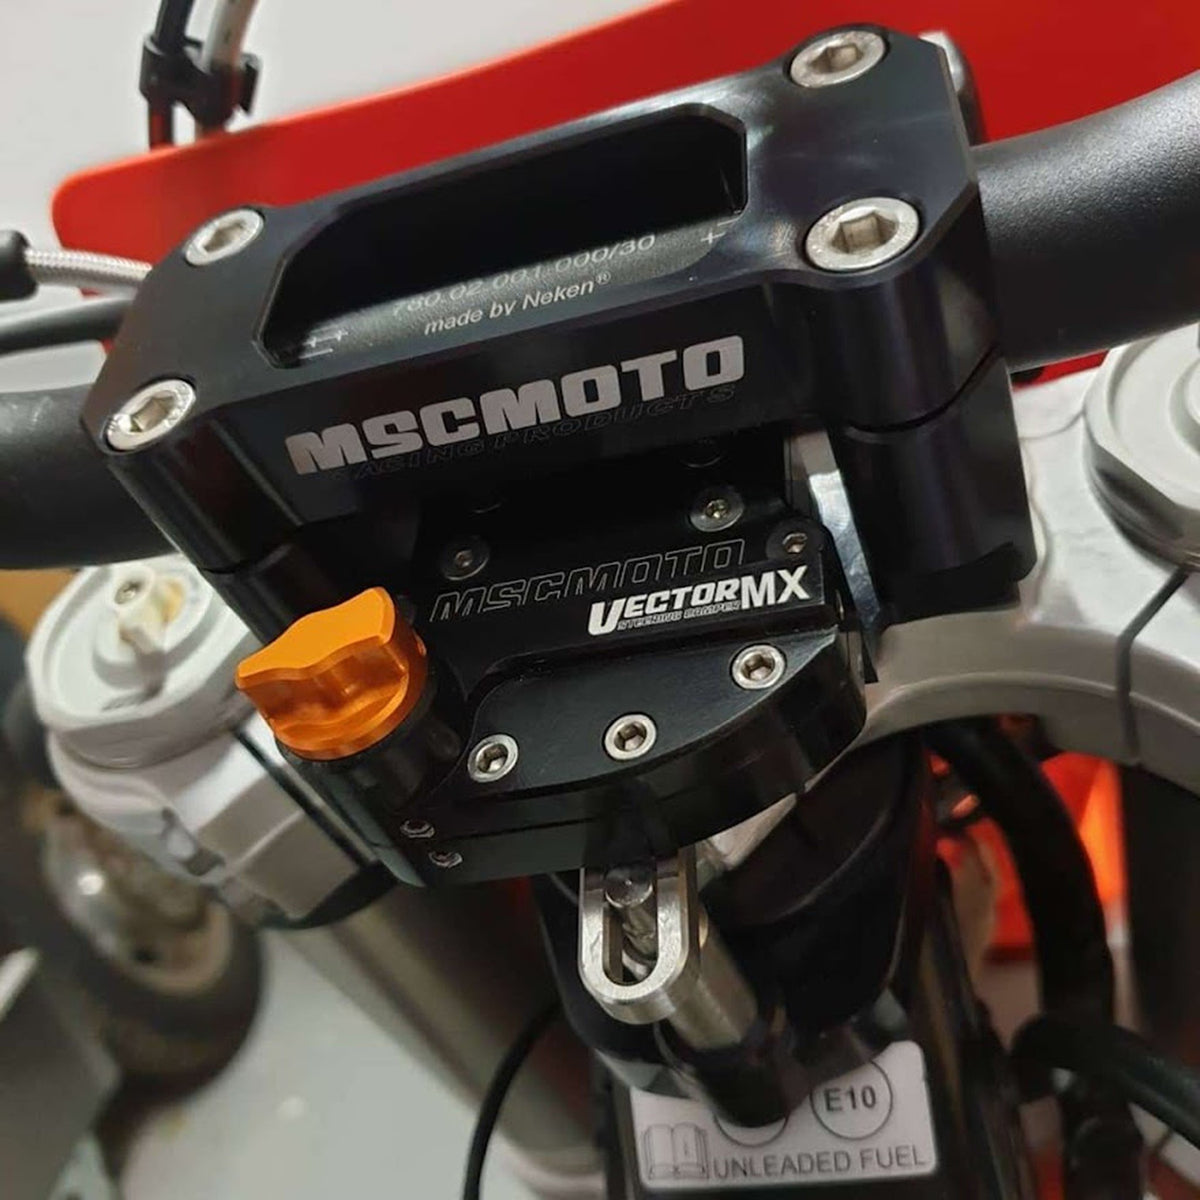 mscmotousa, VectorMX Steering Damper Kit &quot;Down Under&quot; Mount (VEC0012) - YAMAHA YZ65, VEC0012, vectormx, yamaha, yamaha-2018-yz65-esi3965279, , Imported and distributed in North &amp; South America by Lindeco Genuine Powersports.